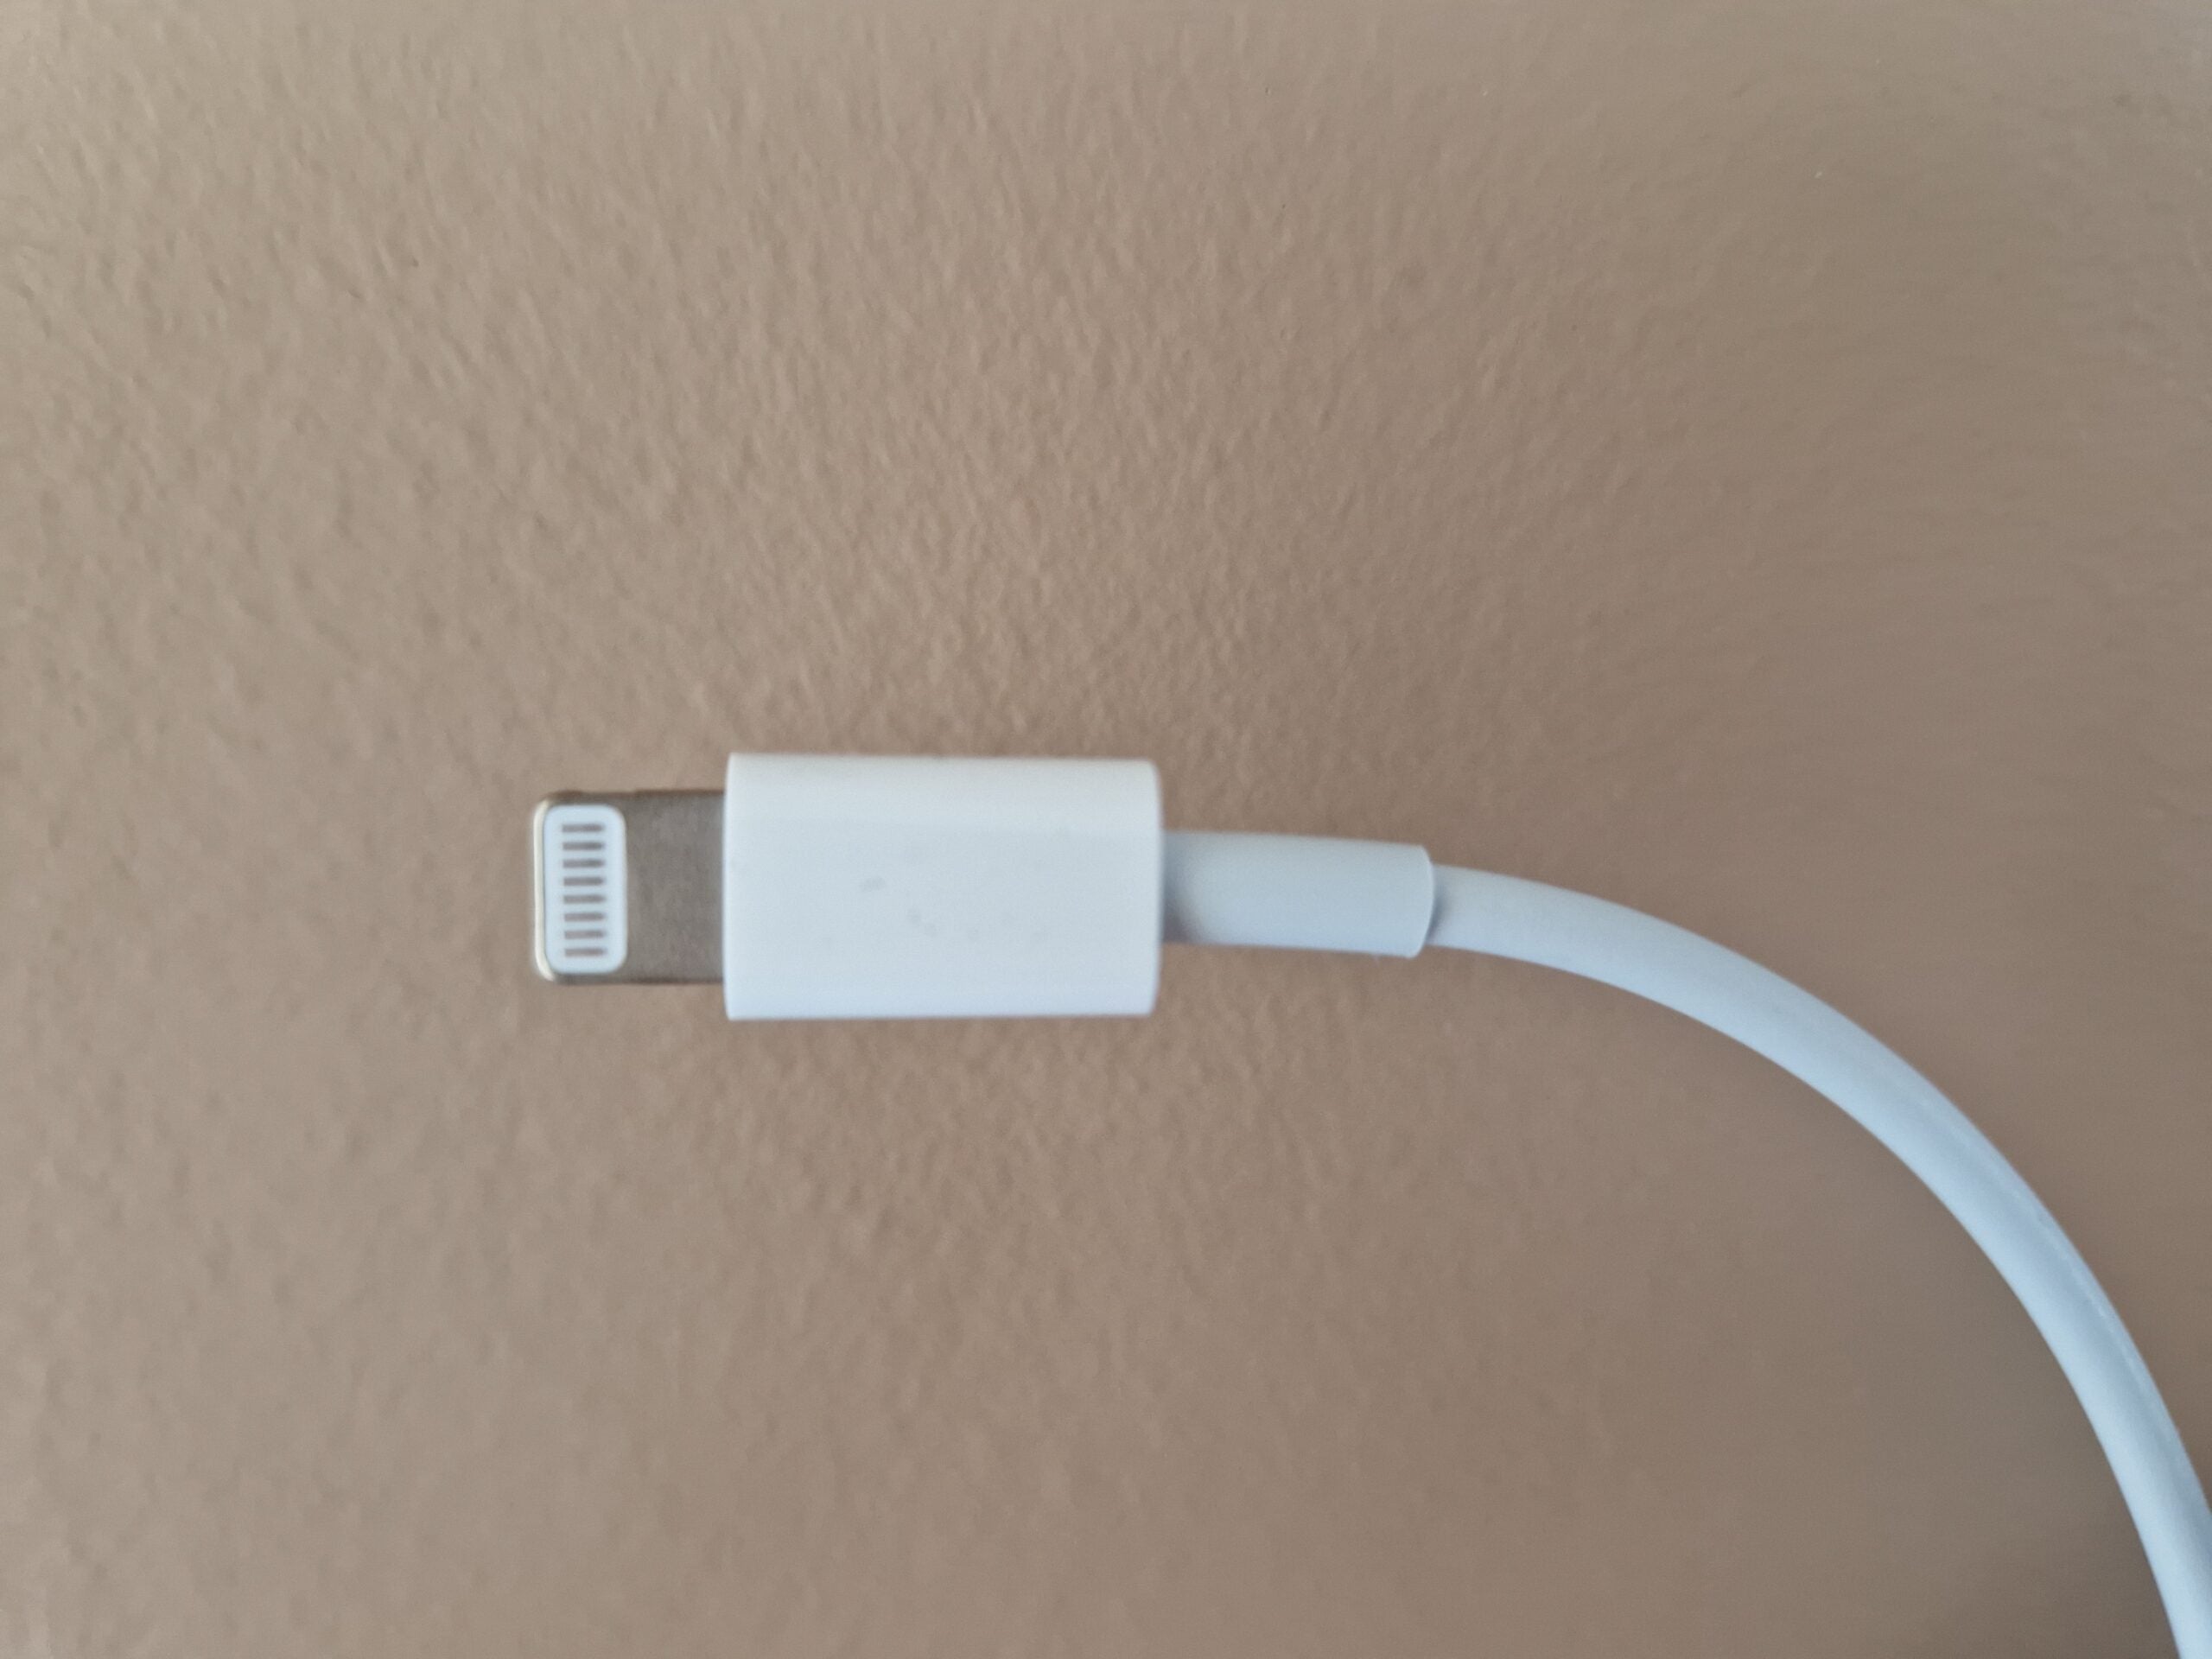 What’s a Lightning Cable? The Apple charging answer defined  | Digital Noch